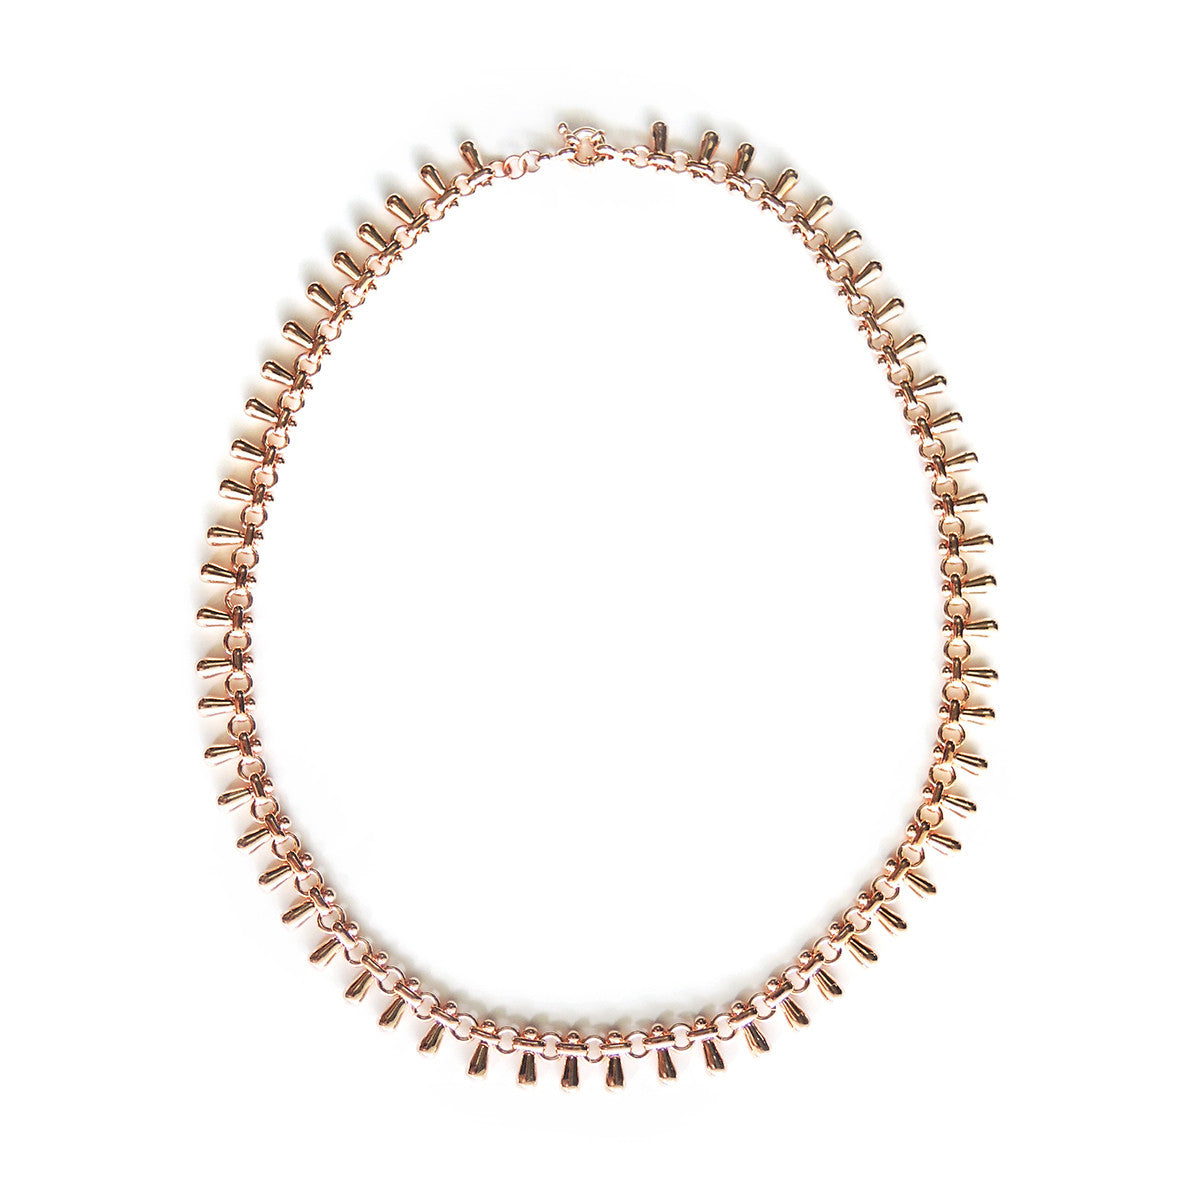 Teardrops Necklace (Rose Gold) - Chainless Brain